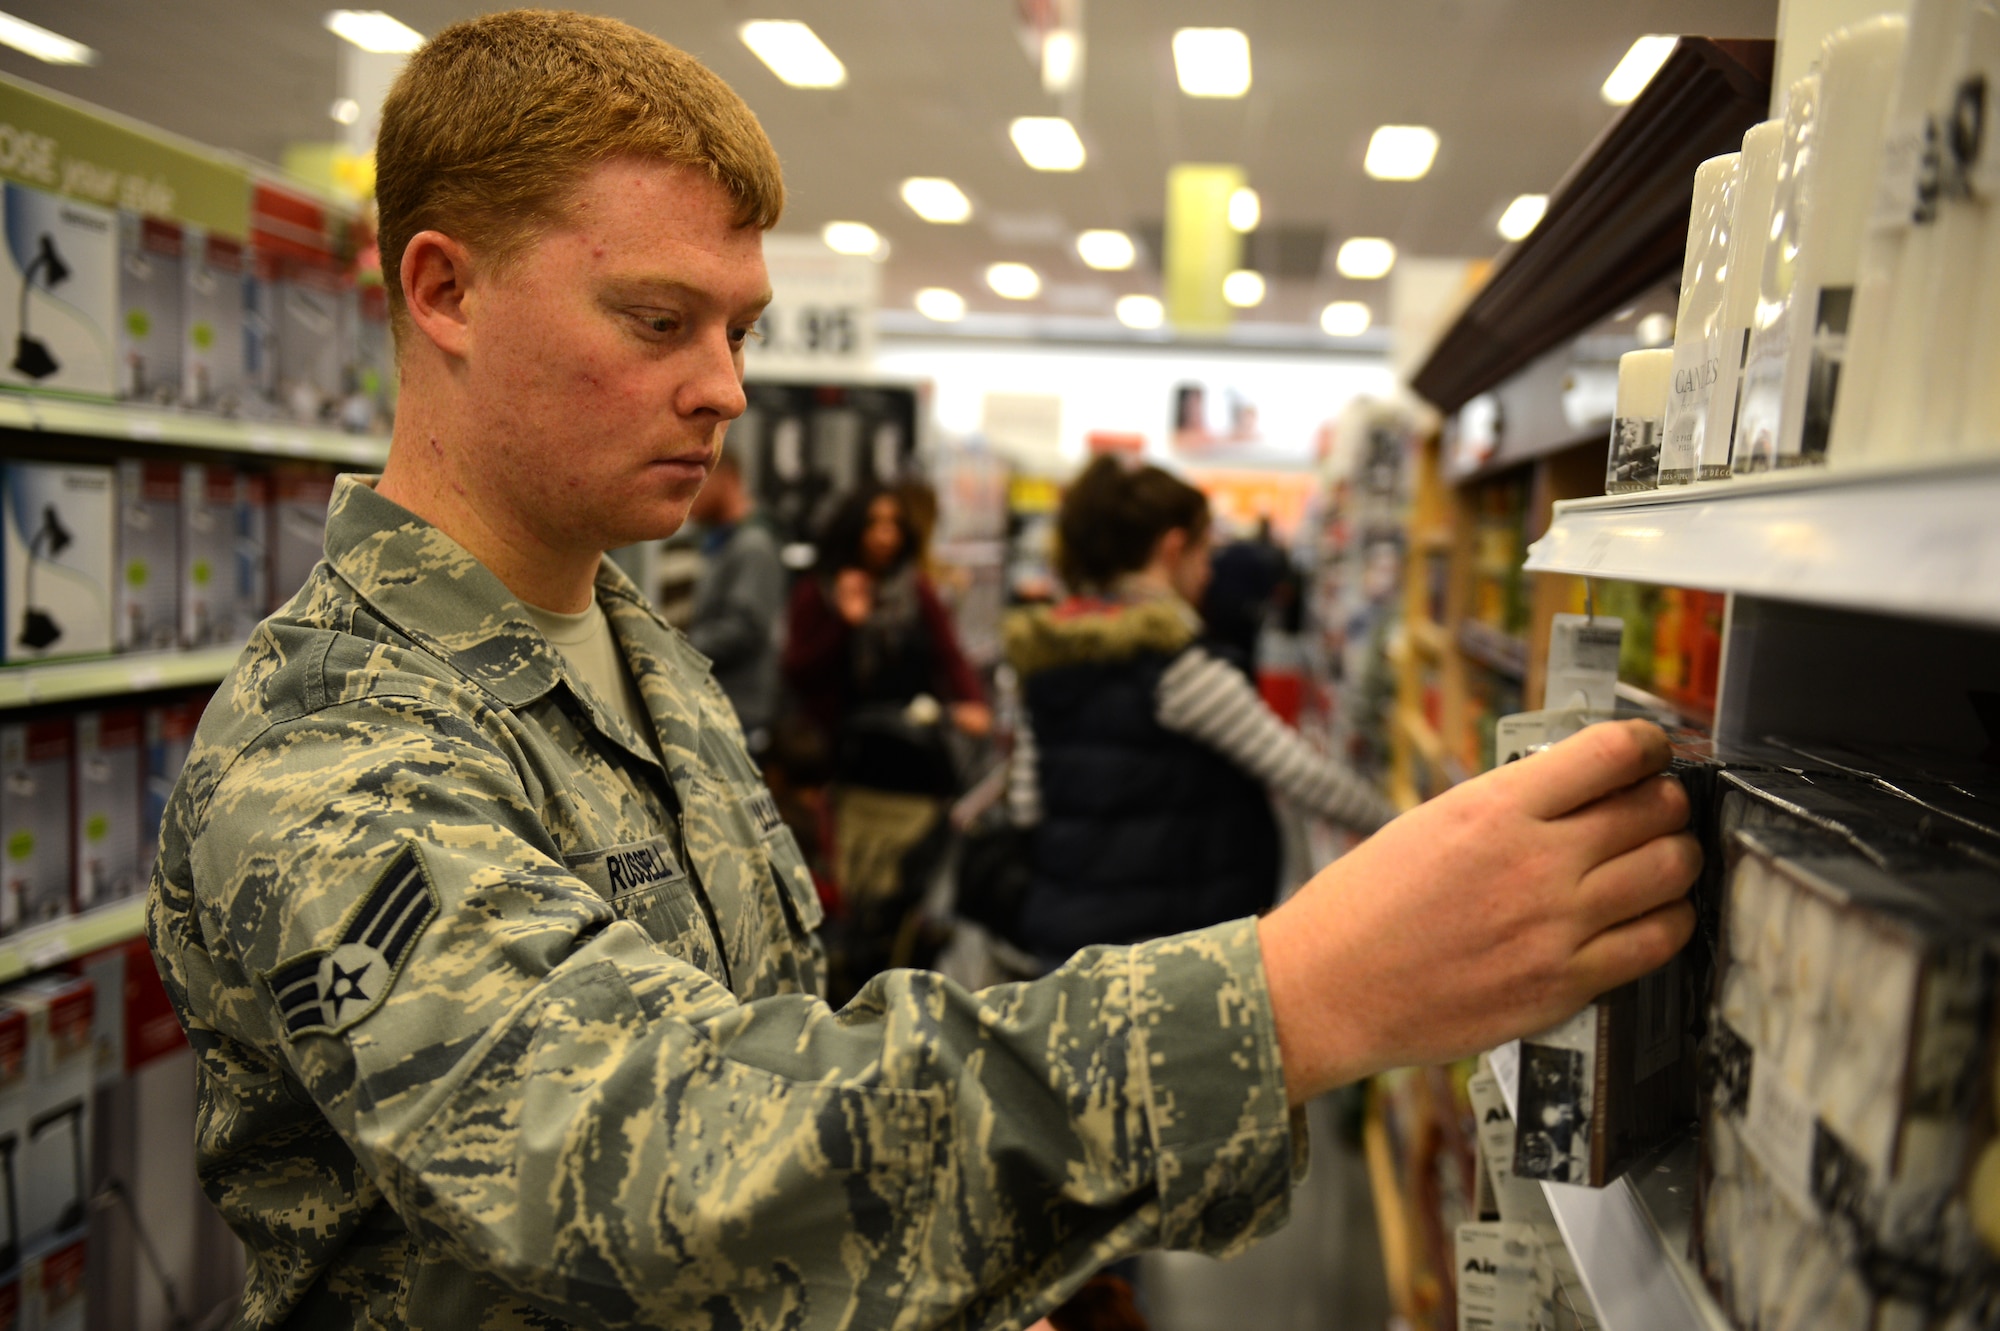 SPANGDAHLEM AIR BASE, Germany – U.S. Air Force Senior Airman Jeffrey Russell, 52nd Comptroller Squadron budget and accounting technician from West Palm Beach, Fla., searches for items during the grand opening ceremony of the Spangdahlem Exchange Nov. 2, 2012.  Base leadership expects the Exchange to generate $2.4 million in revenue per month, with some of the proceeds going back into the Spangdahlem community. (U.S. Air Force photo by Airman 1st Class Gustavo Castillo/Released)